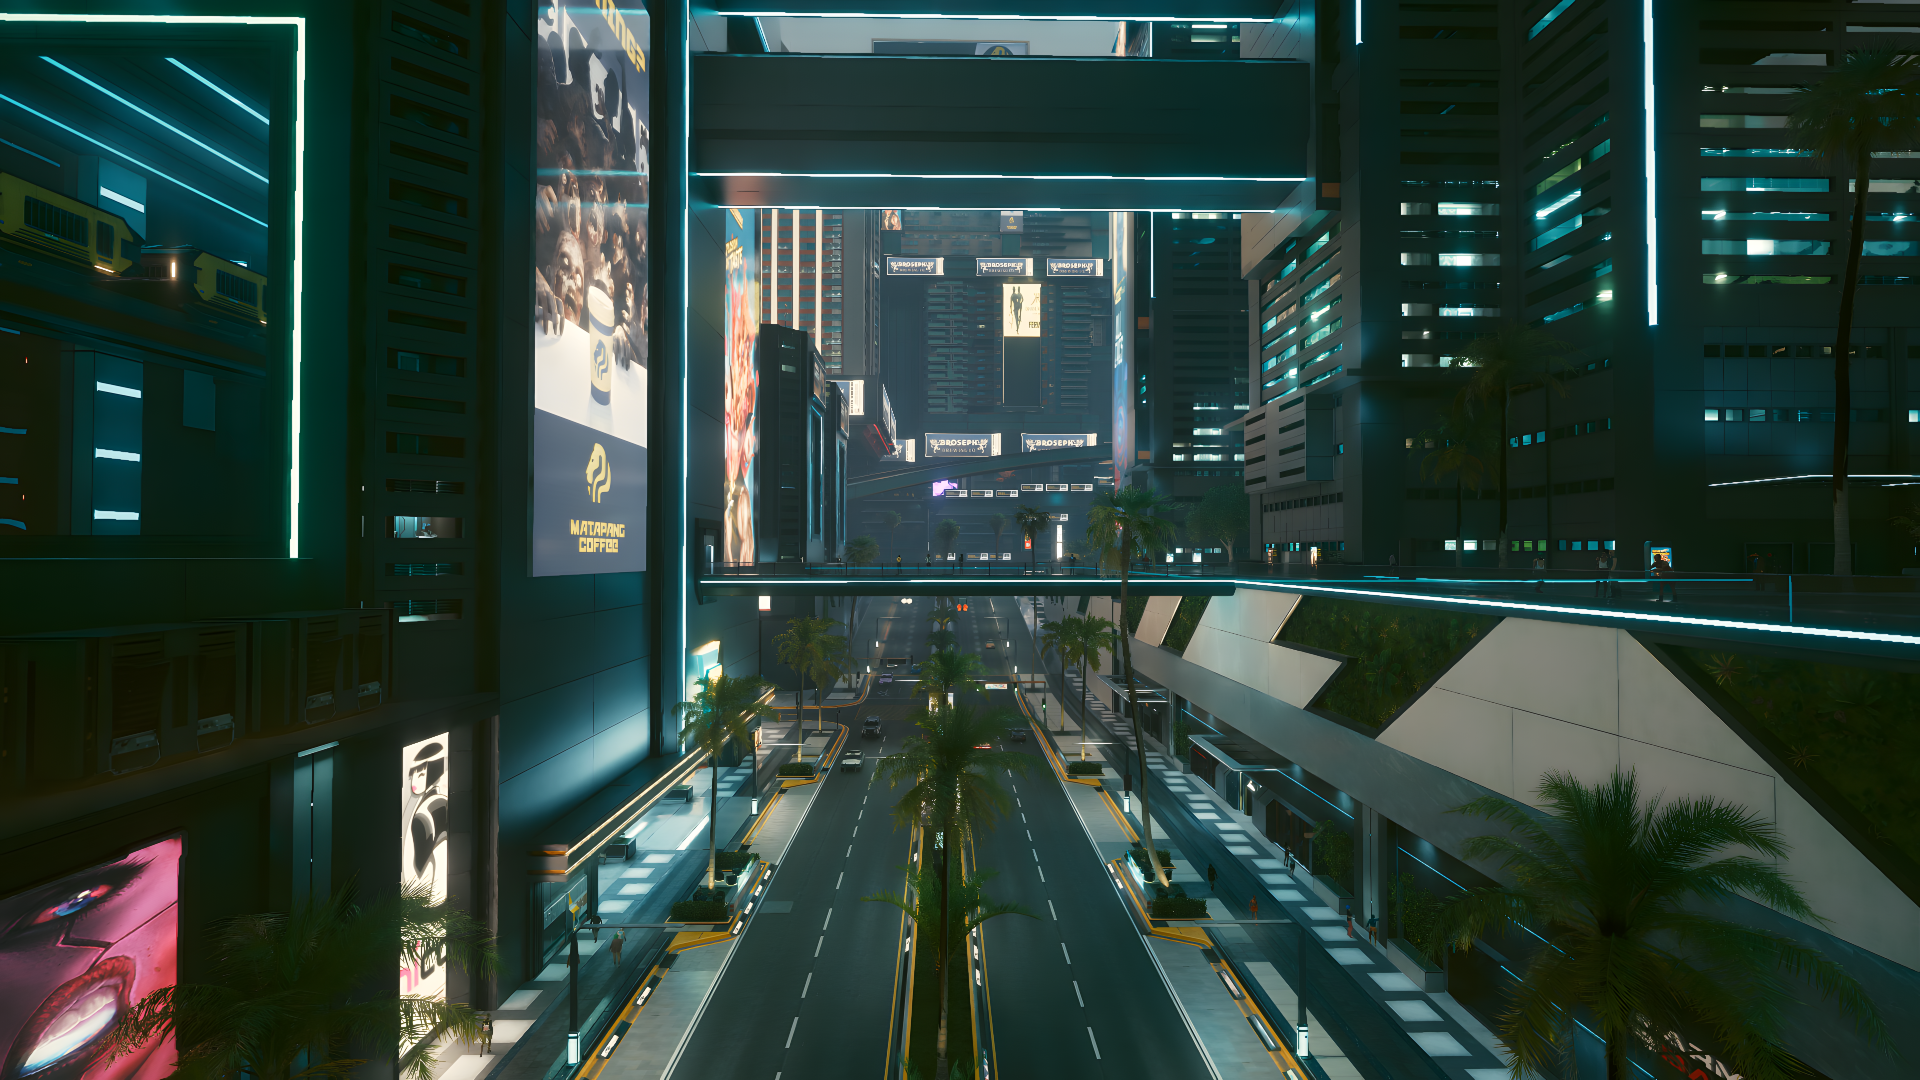 Futuristic cyberpunk cityscape with neon lights and towering skyscrapers, inspired by Cyberpunk 2077, perfect HD desktop wallpaper.